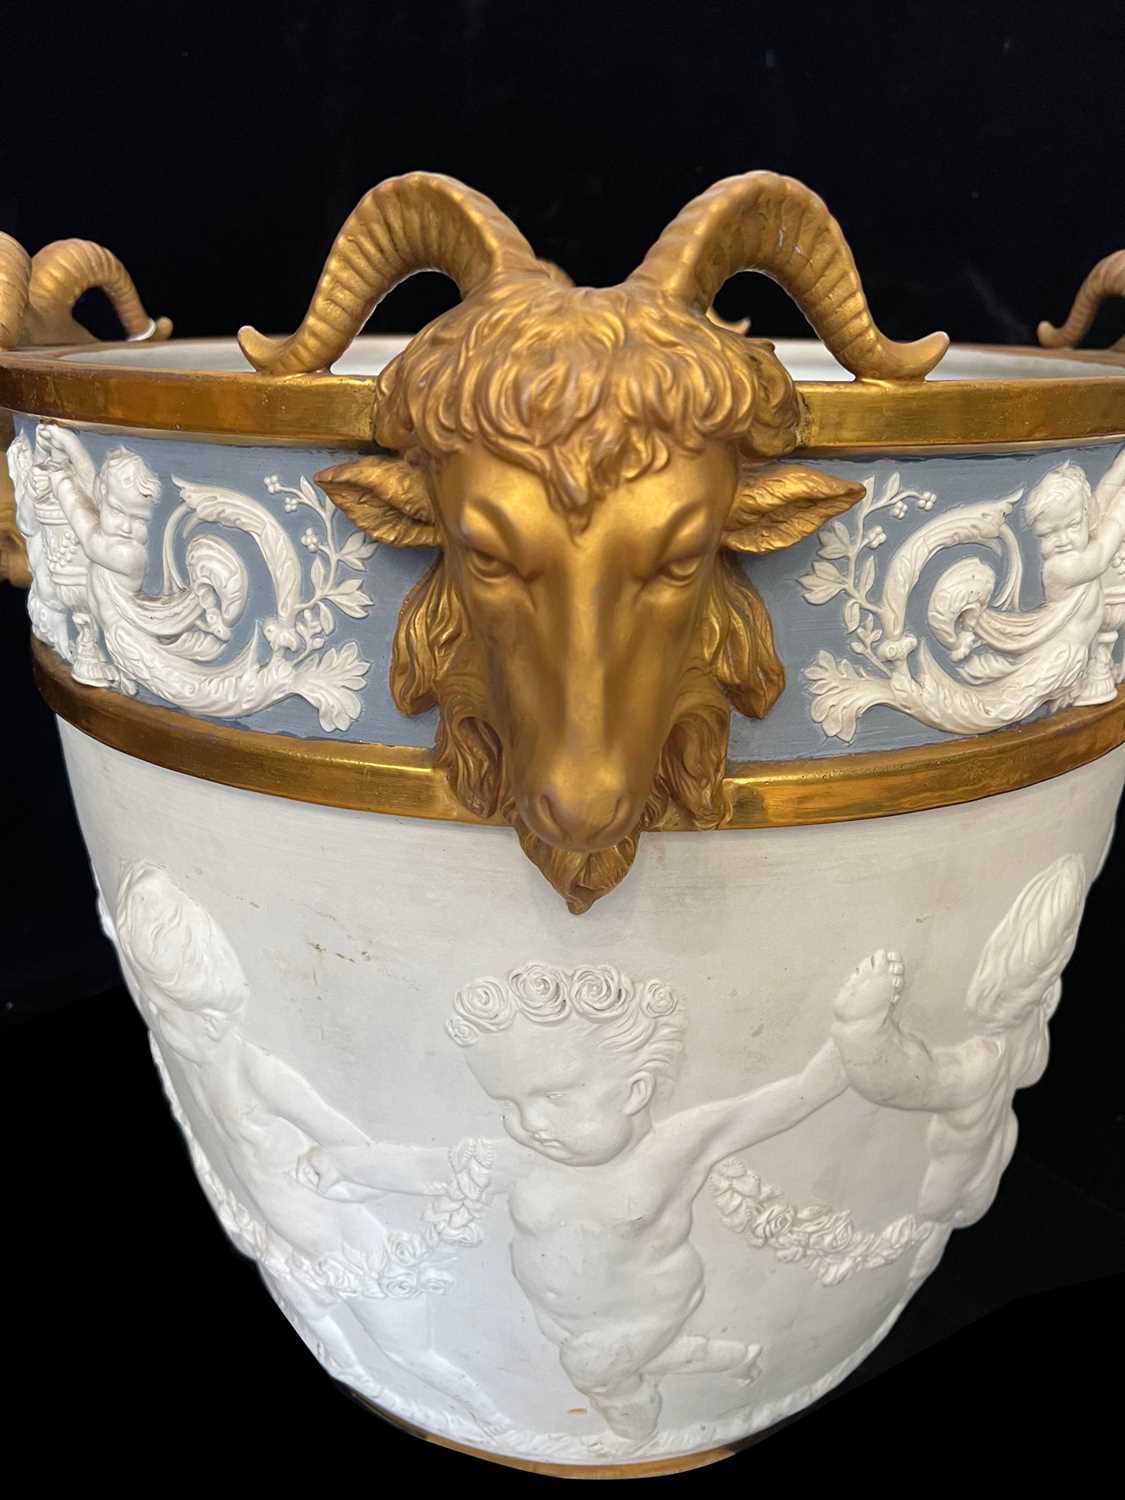 A LARGE 19TH CENTURY NEO-CLASSICAL STYLE BISQUE PORCELAIN AND PARCEL GILT JARDINIERE - Image 2 of 9